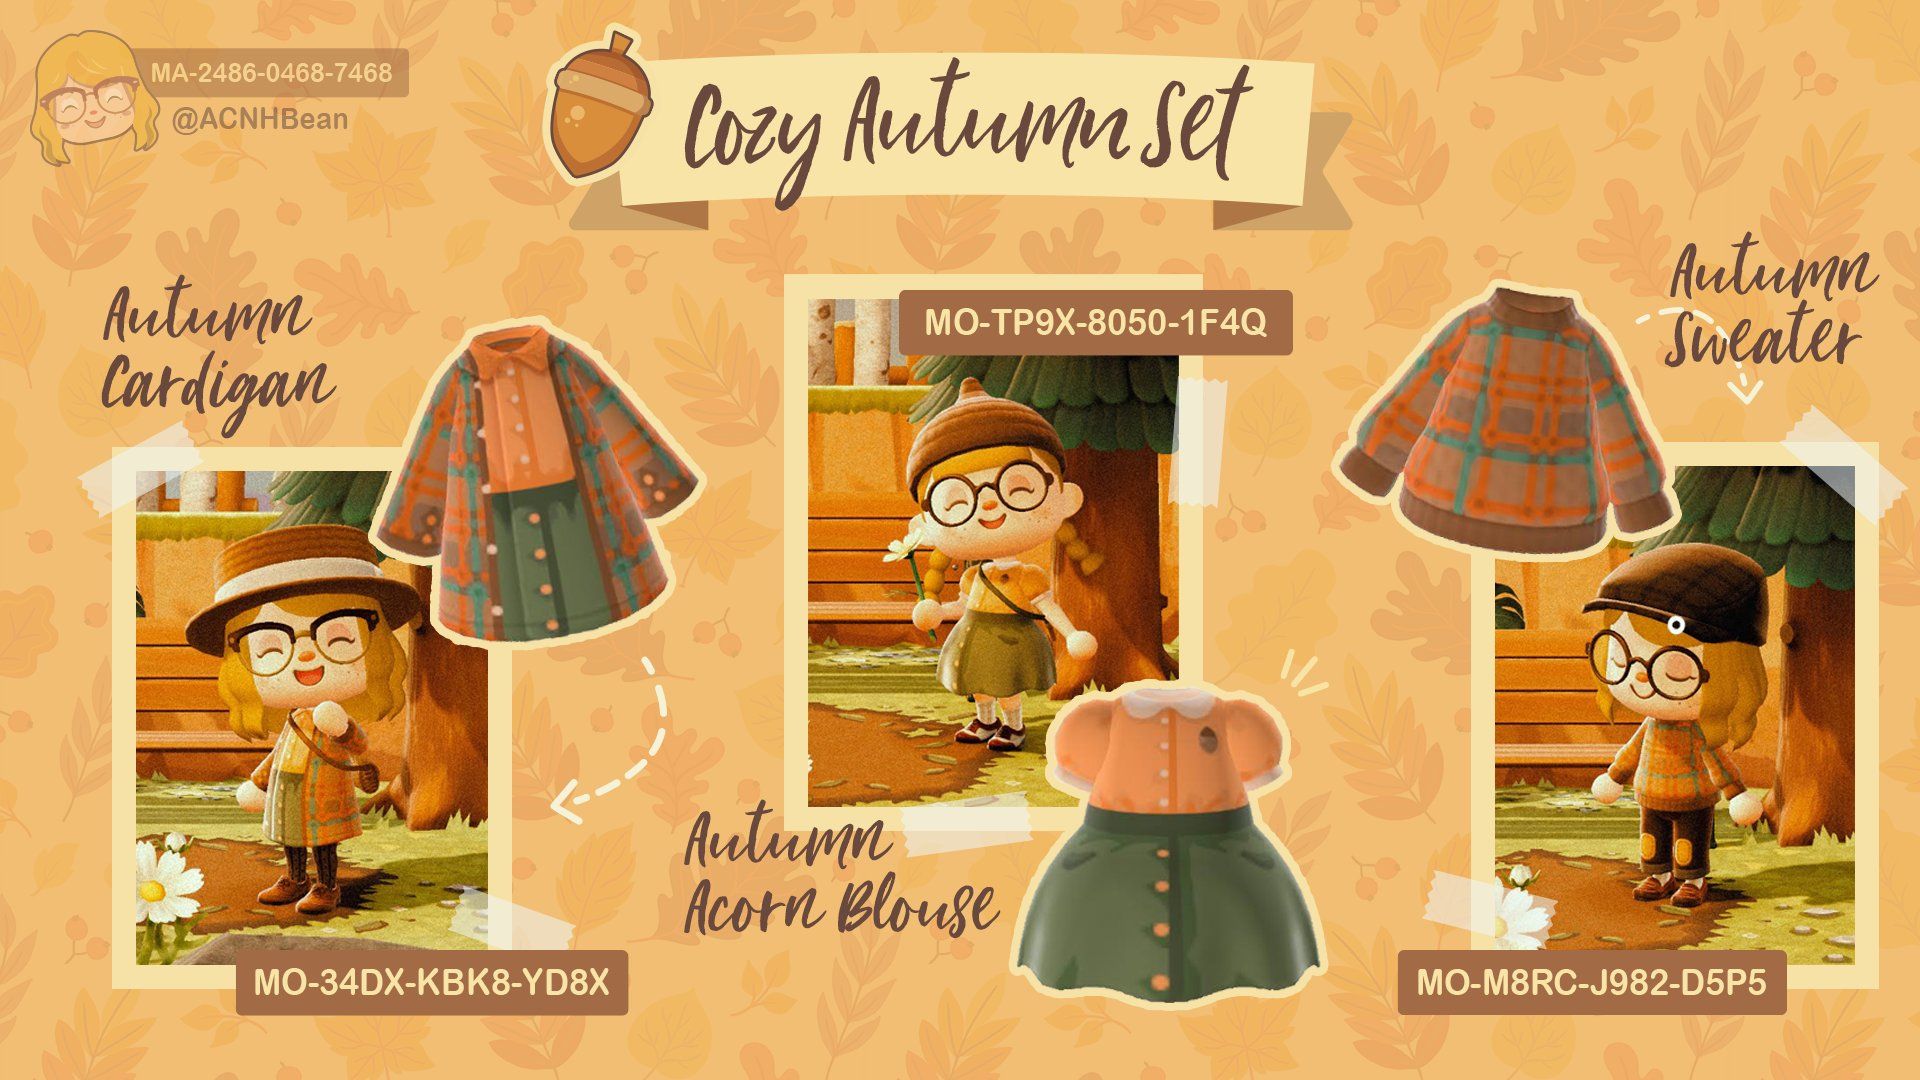 I made a cozy autumn set of clothes in preparation for fall!! I am so excited for red trees